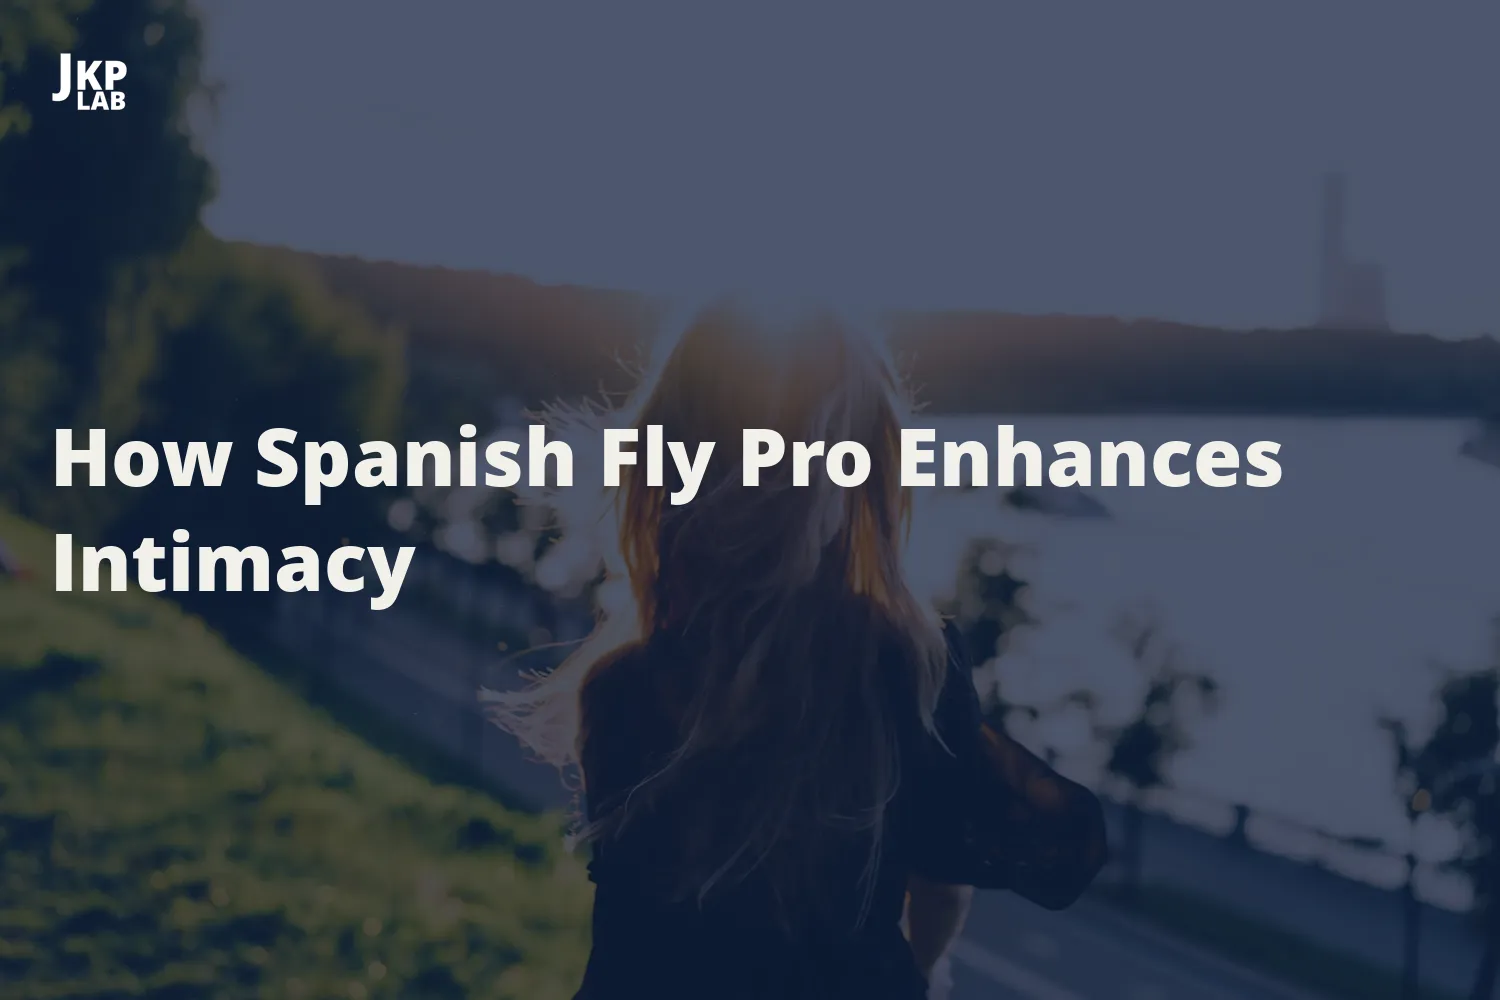 Spanish Fly and its Role in Boosting Fertility